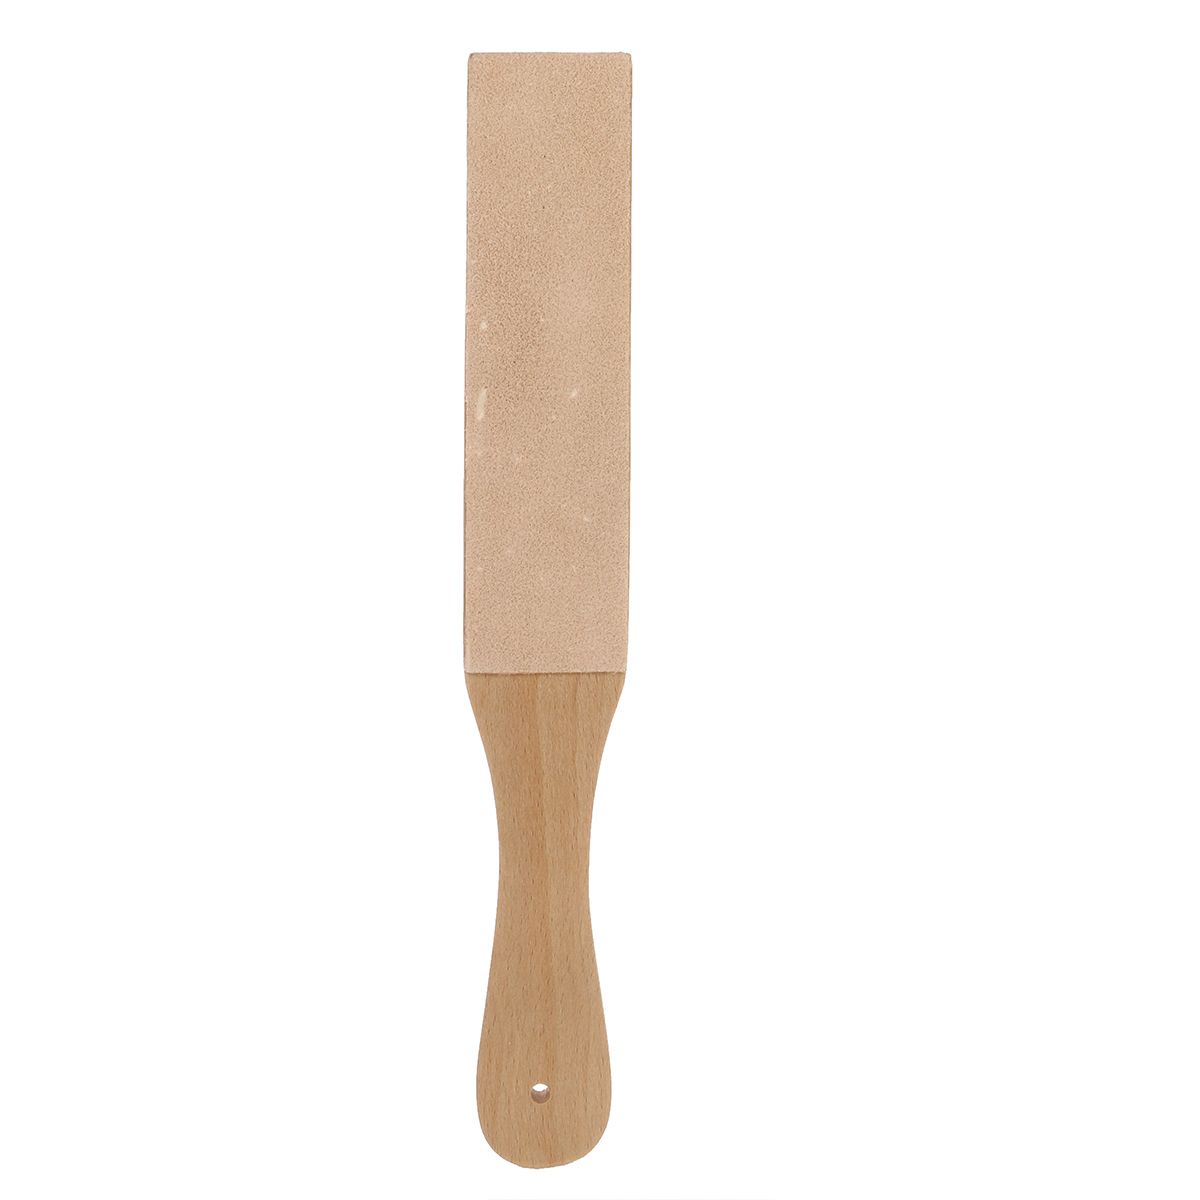 Dual-Sided-Leather-Blade-Strop-for-Razors-Sharpener-amp-Polishing-Compounds-1428659